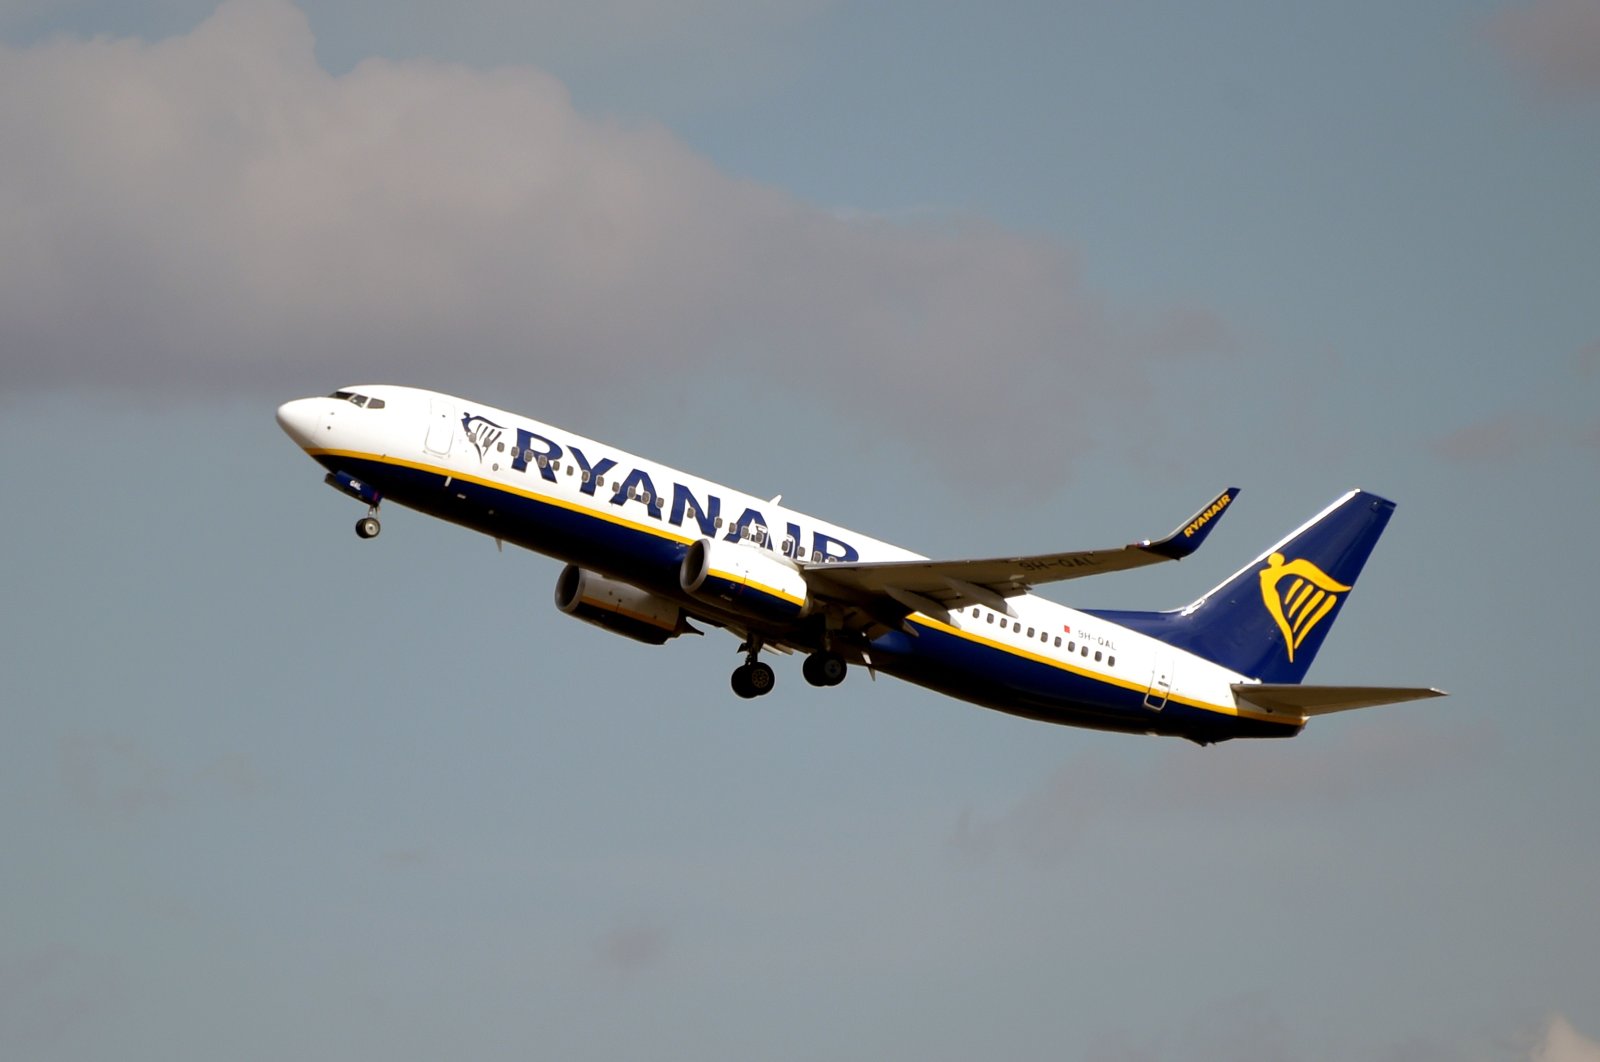 This file photo shows a Boeing 737 NG / Max belonging to Irish budget airline Ryanair after taking off from the Toulouse-Blagnac airport near Toulouse. (AFP Photo)